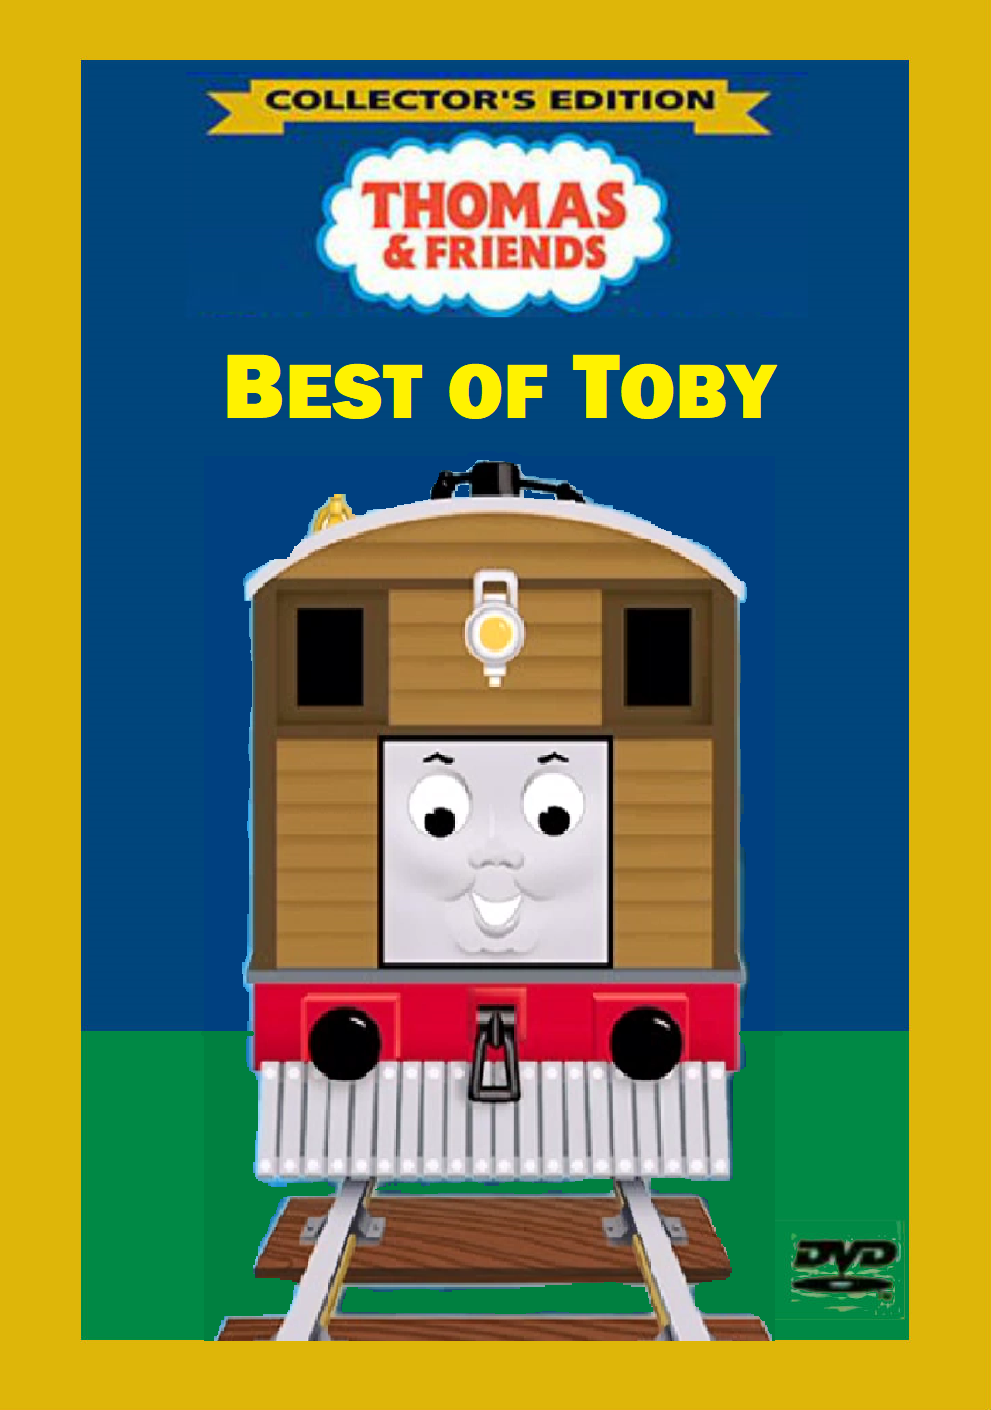 Best of Toby (BiggestThomasFan's version), Scratchpad